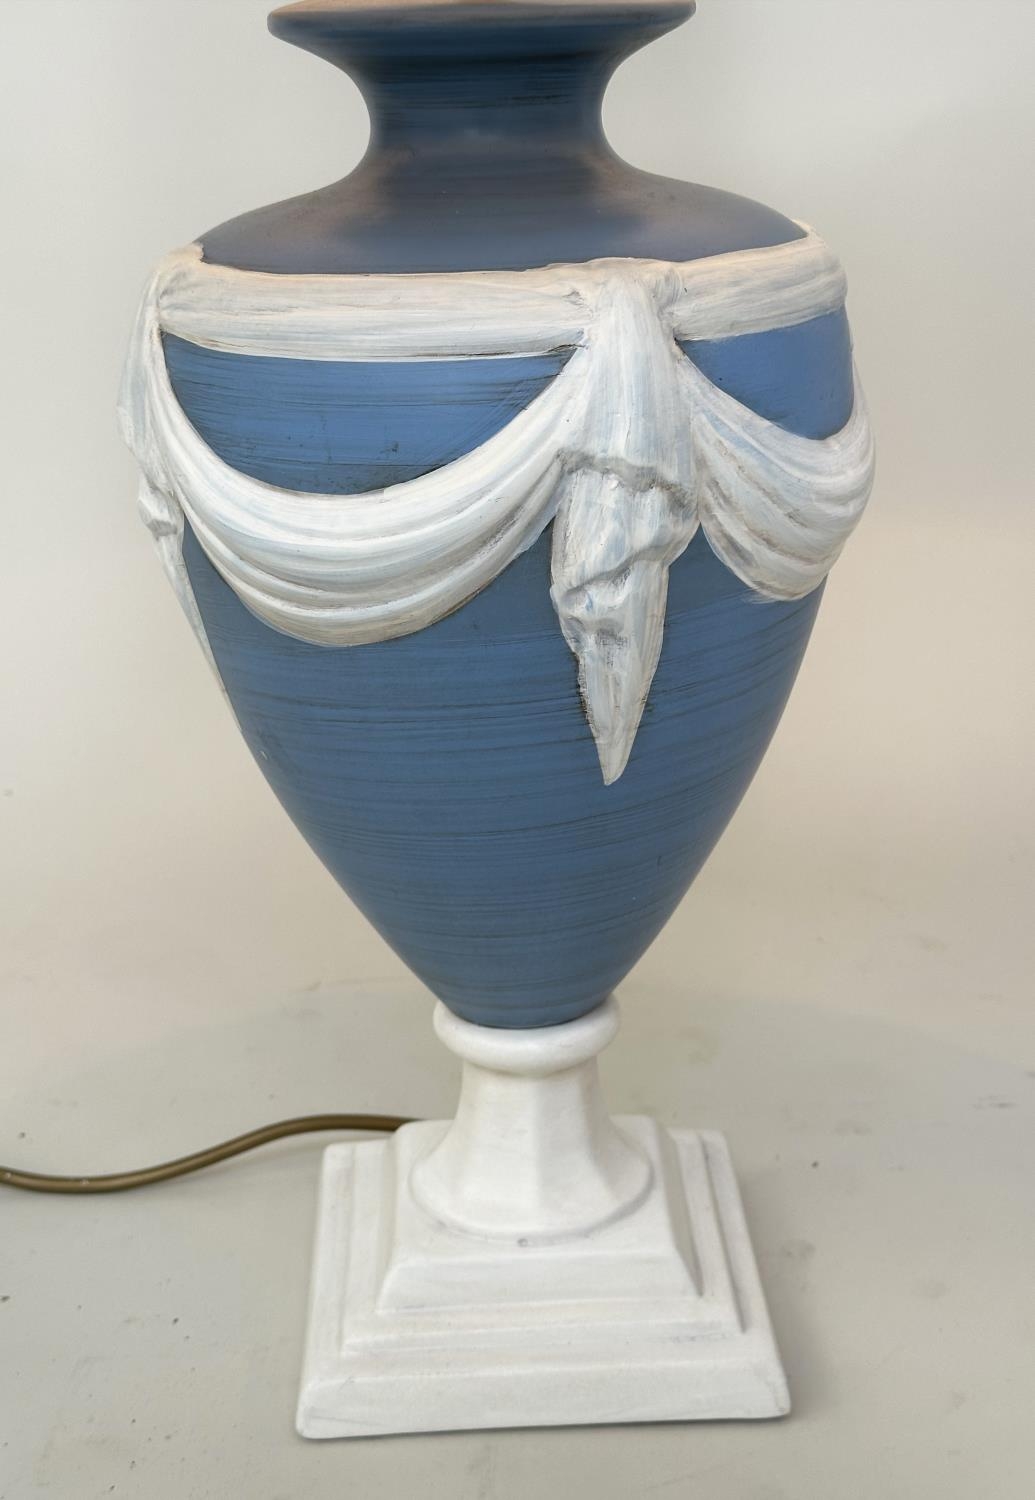 TABLE LAMPS, a pair, Wedgwood jasperware style of vase form with shades, 70cm H. - Image 5 of 12